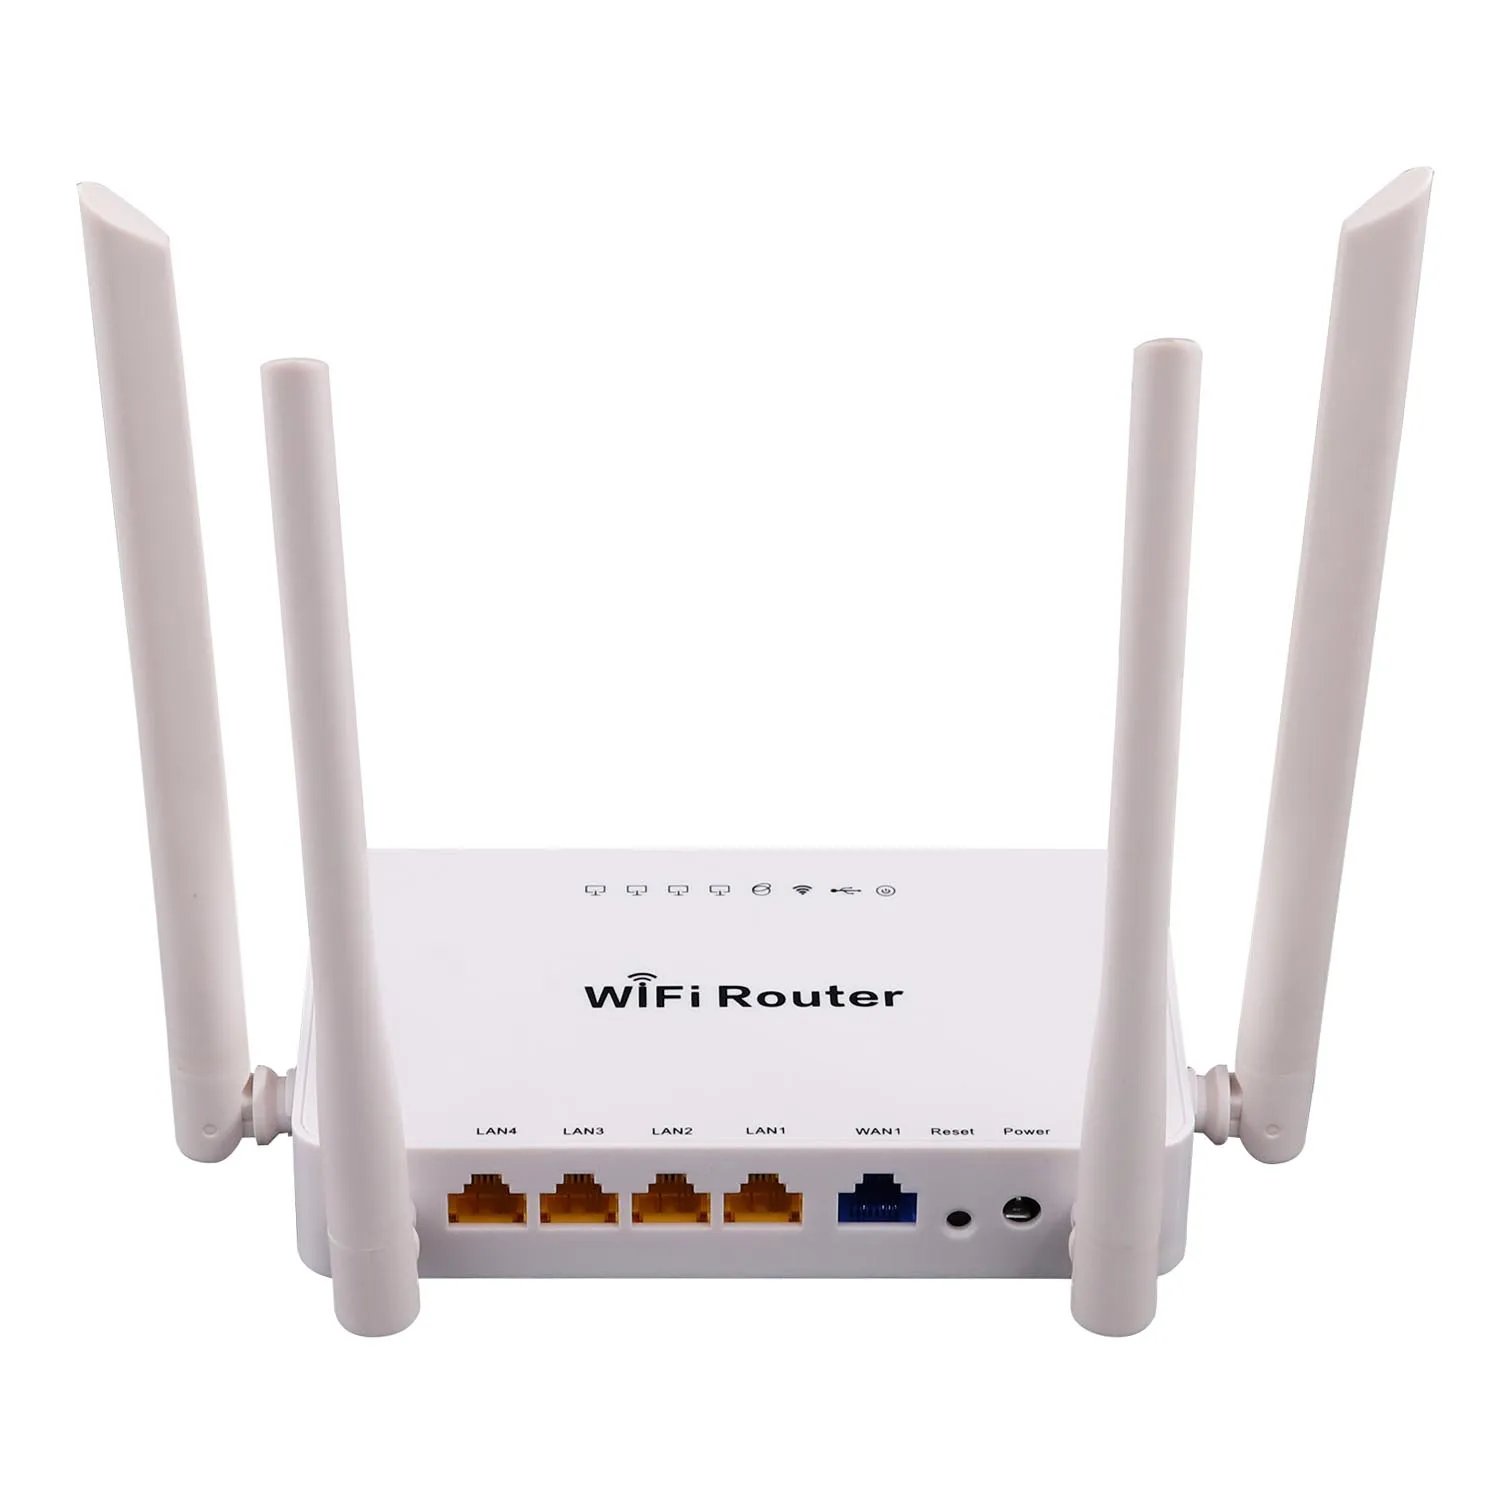 WE1626 Long Range Indoor Wireless Network Router With USB Port English Version 